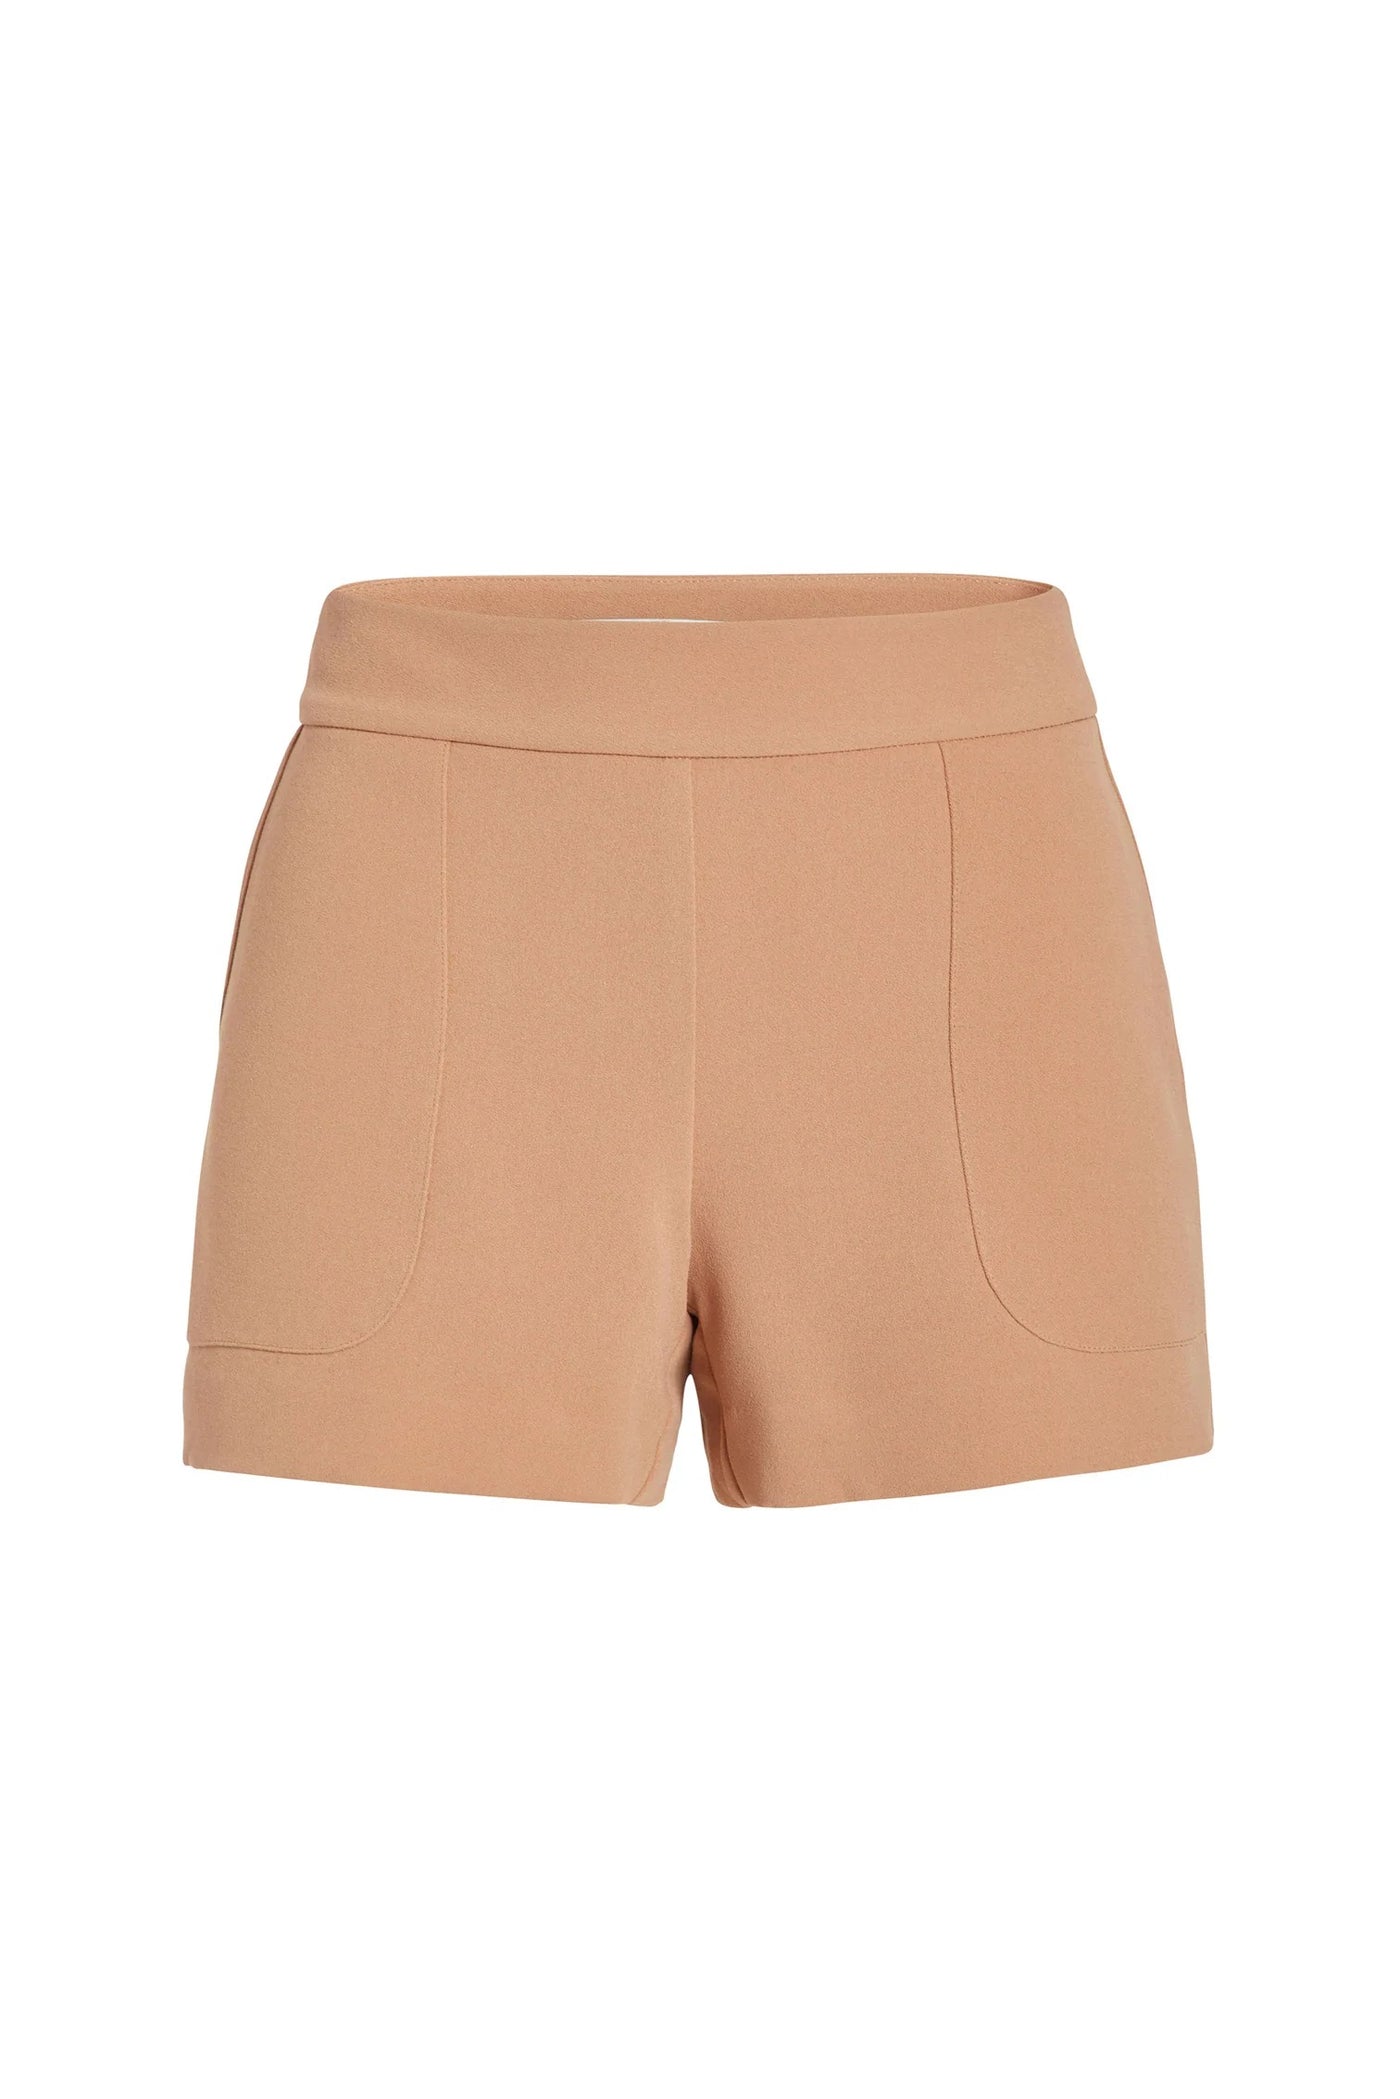 Mia Shorts in Toffee